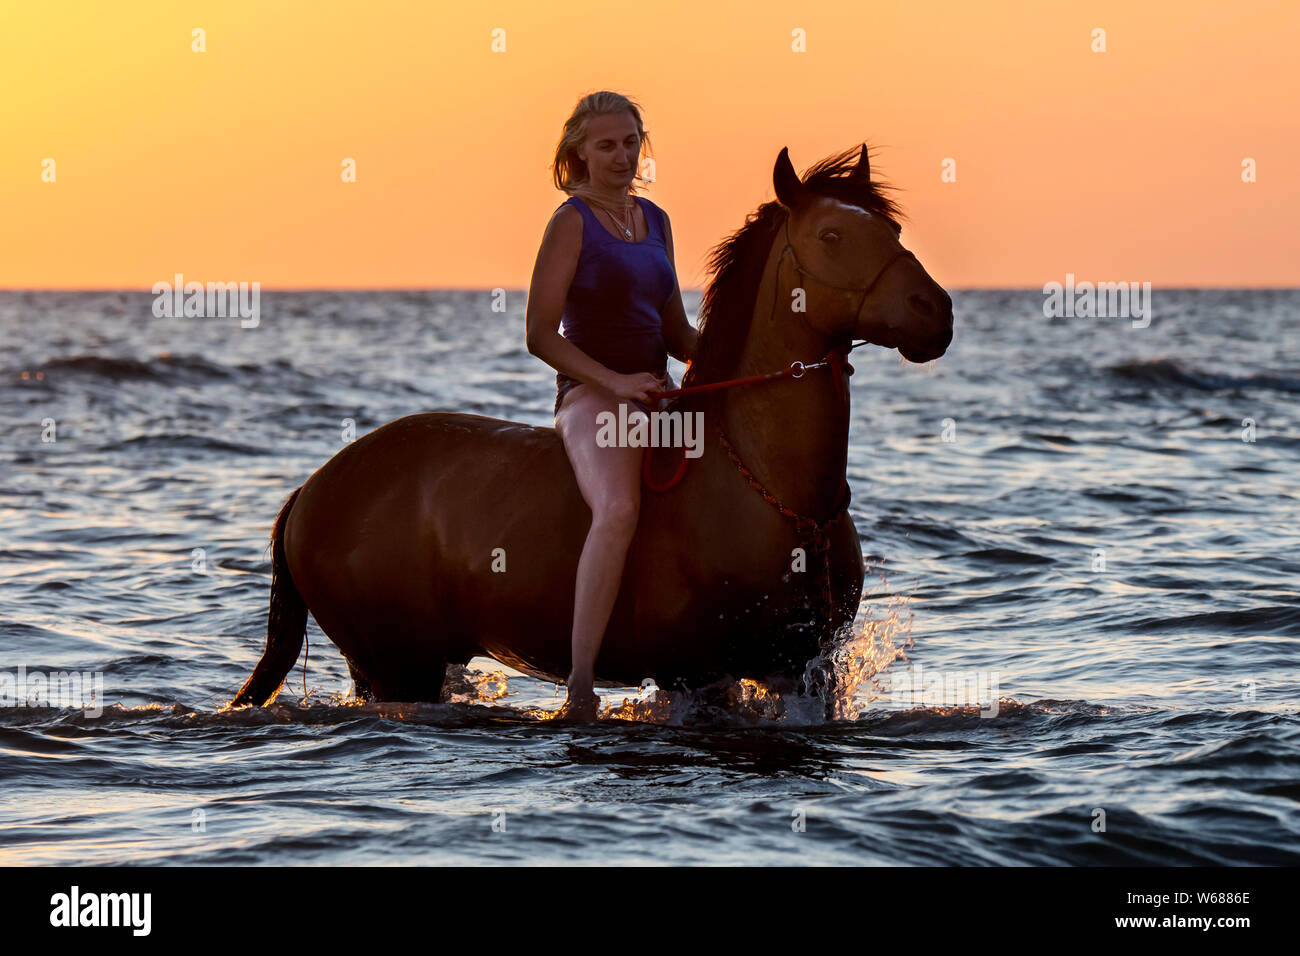 Horsewoman / female horse rider riding bareback in shallow water at sunset in summer along the North Sea coast Stock Photo